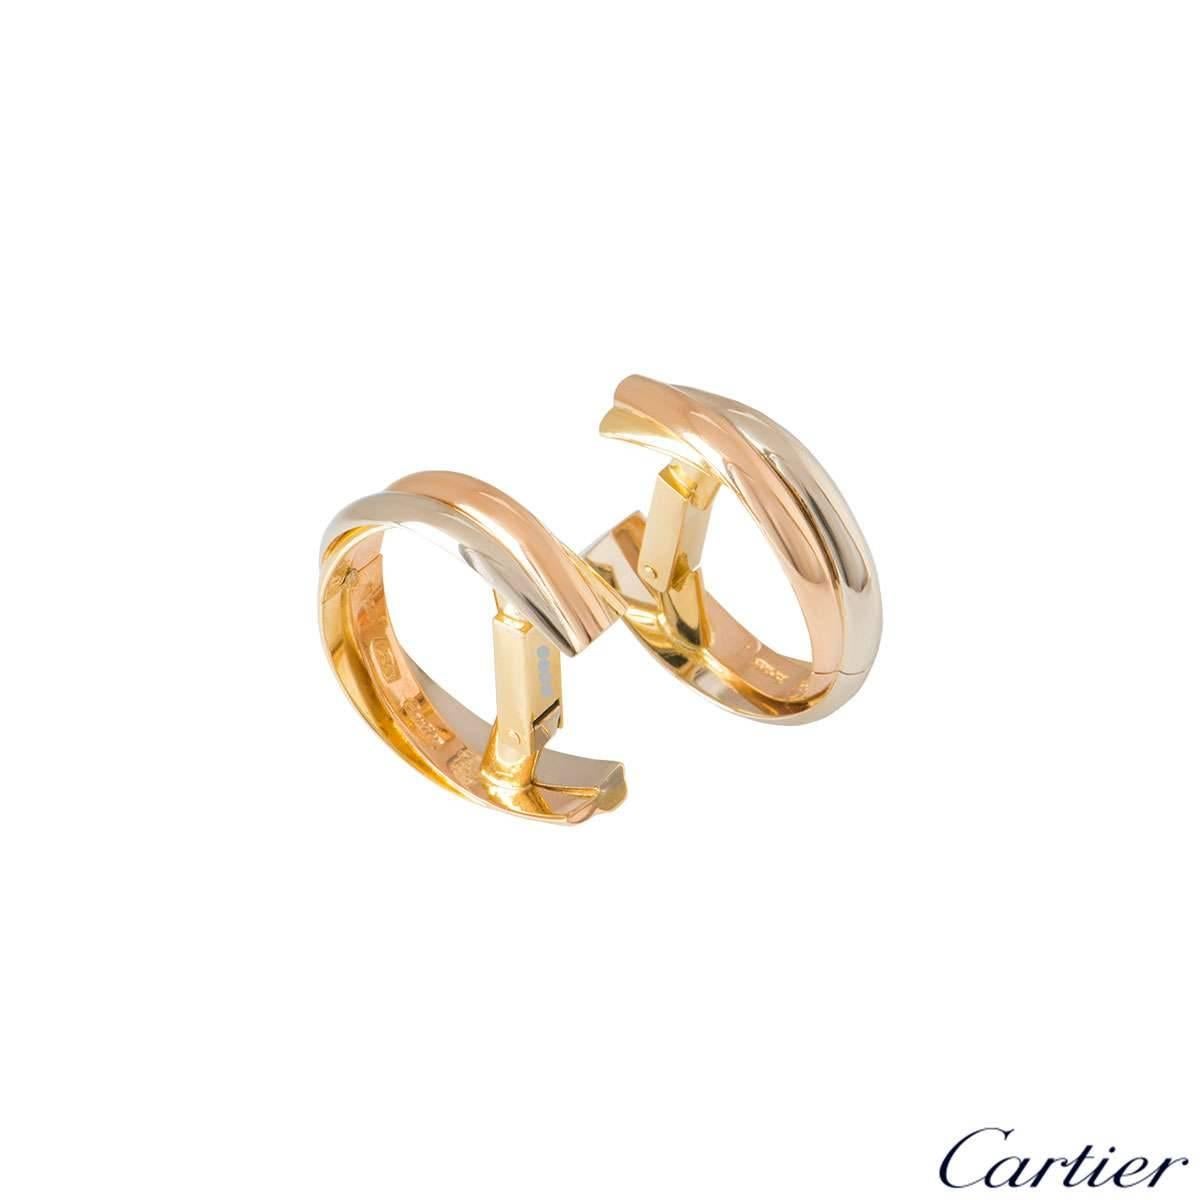 A pair of 18k tri-colour gold Trinity cufflinks by Cartier. The cufflinks are made up of three interwoven gold bands in yellow, white and rose gold with a polished finish, complete with a lever hinge fitting and bar connector. The cufflinks measure